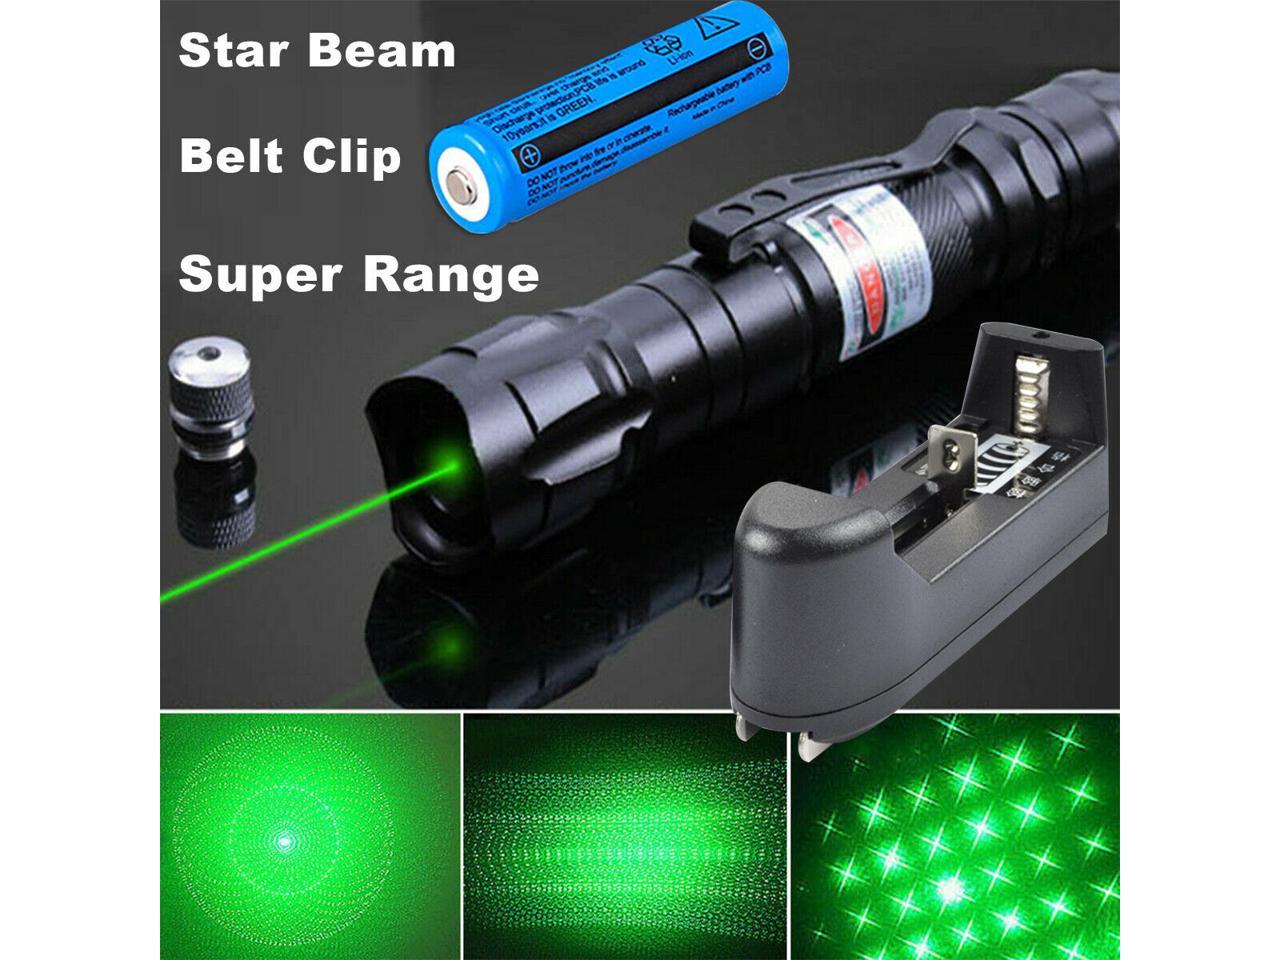 990Miles Green Laser Pointer Pen USB Rechargeable 532nm Visible Beam+Star Cap 